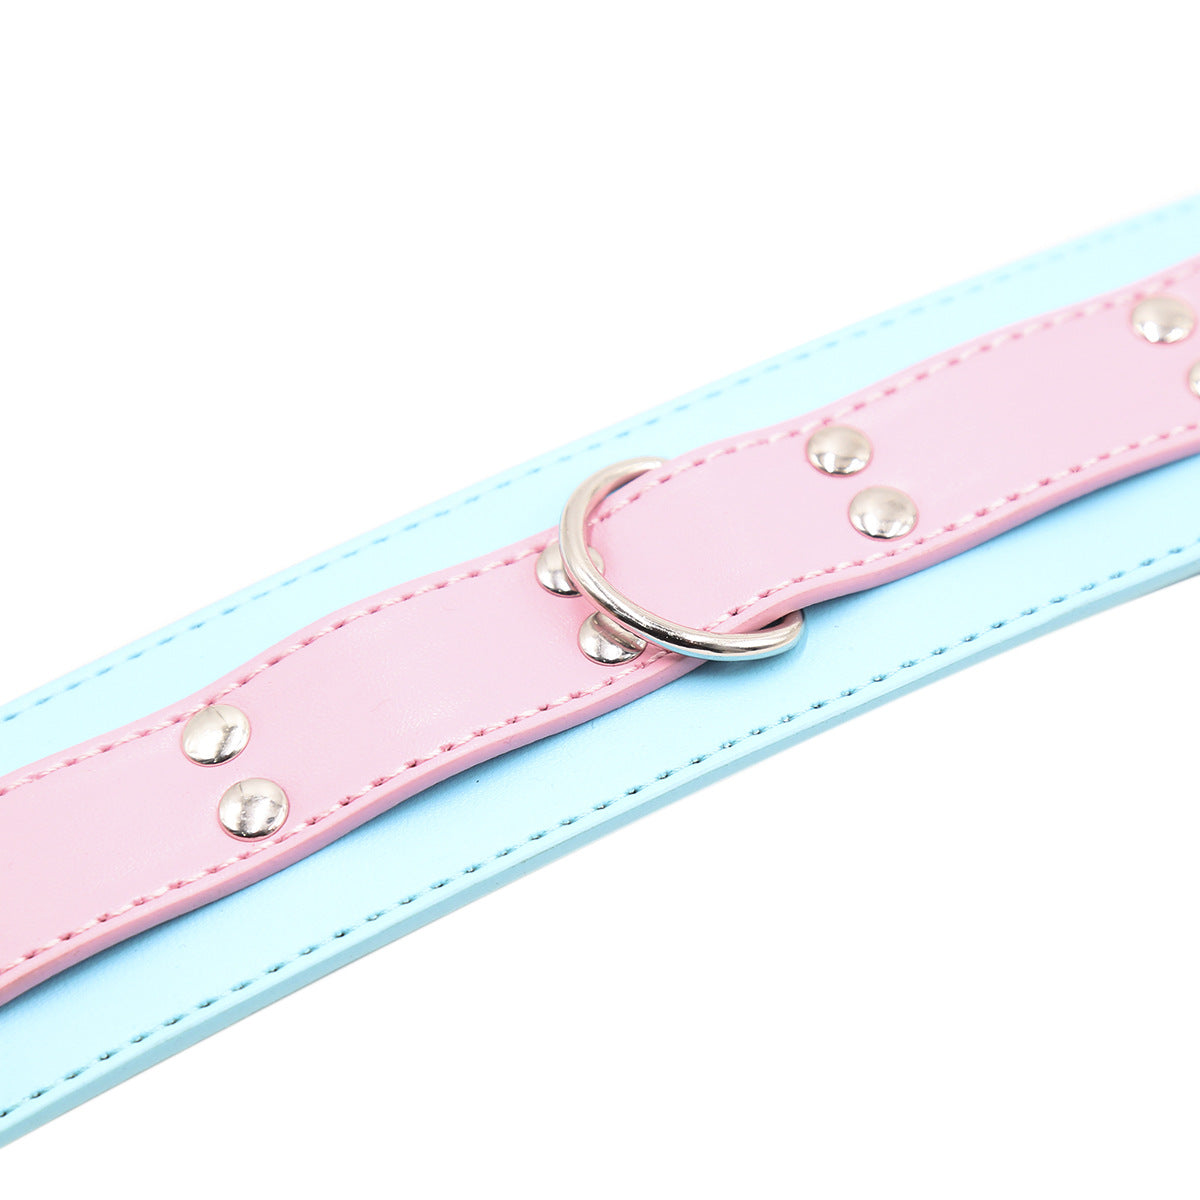 Bow To Me Pink and Blue PU Collar and Leash - Sexy Bee UK